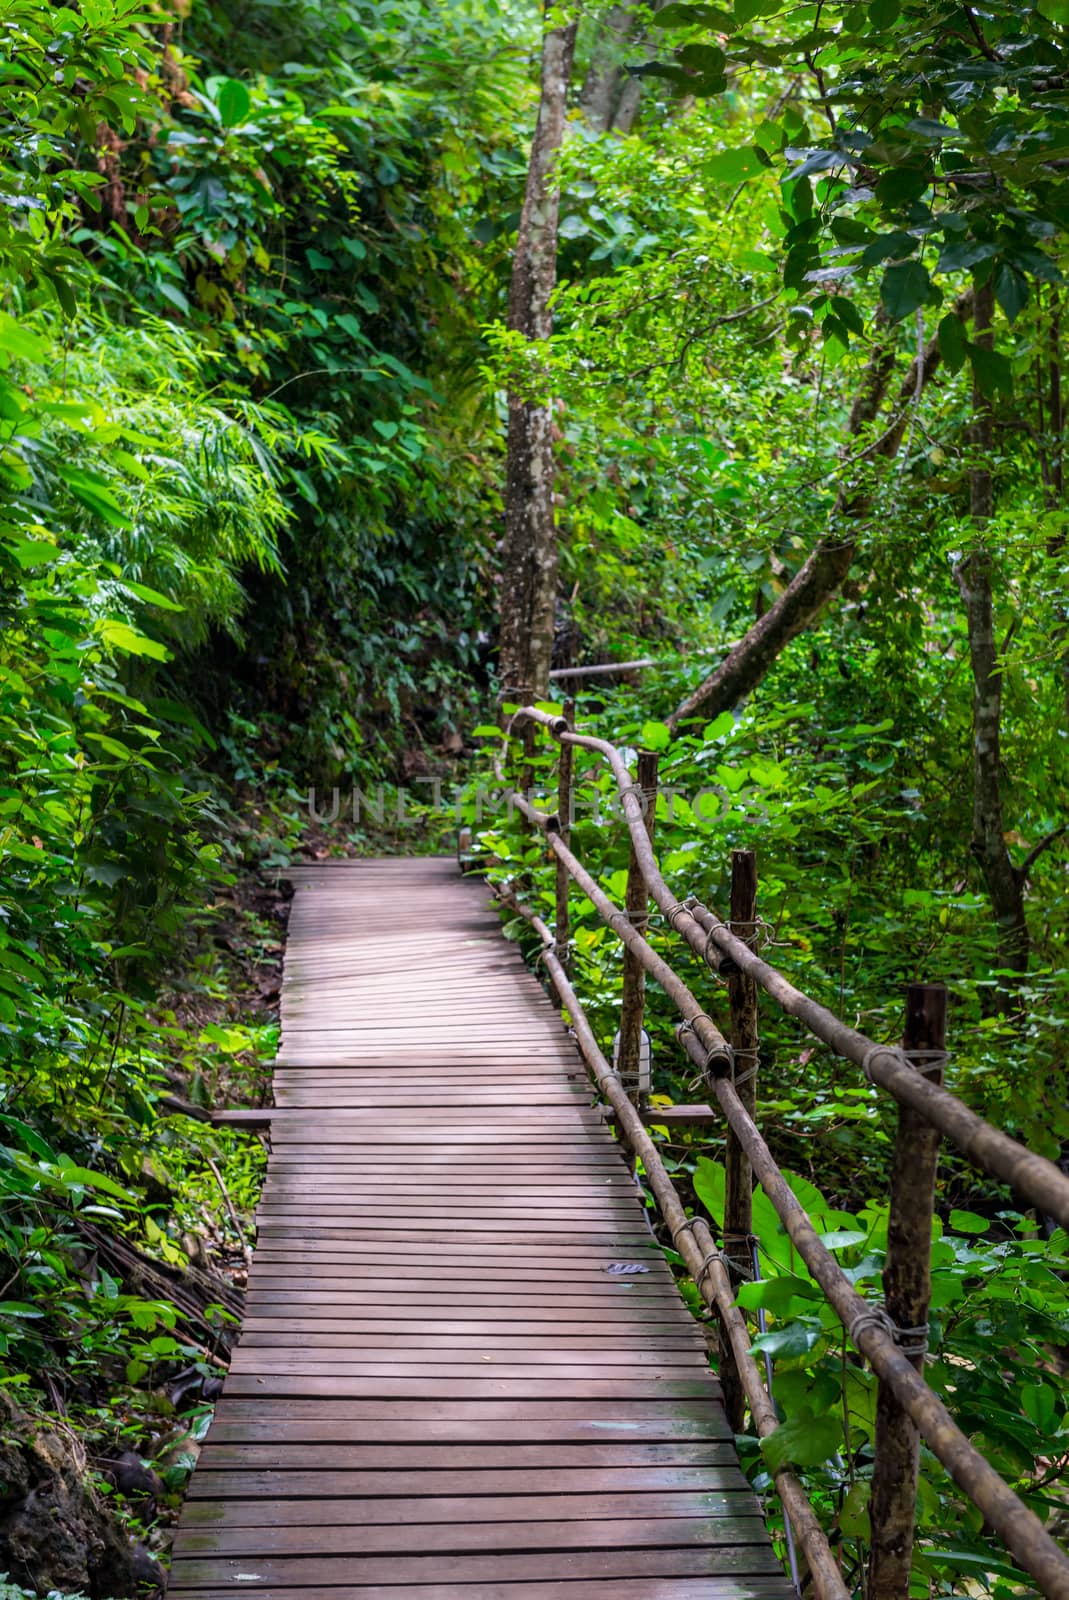 A picturesque wooden path in Thailand in the forest